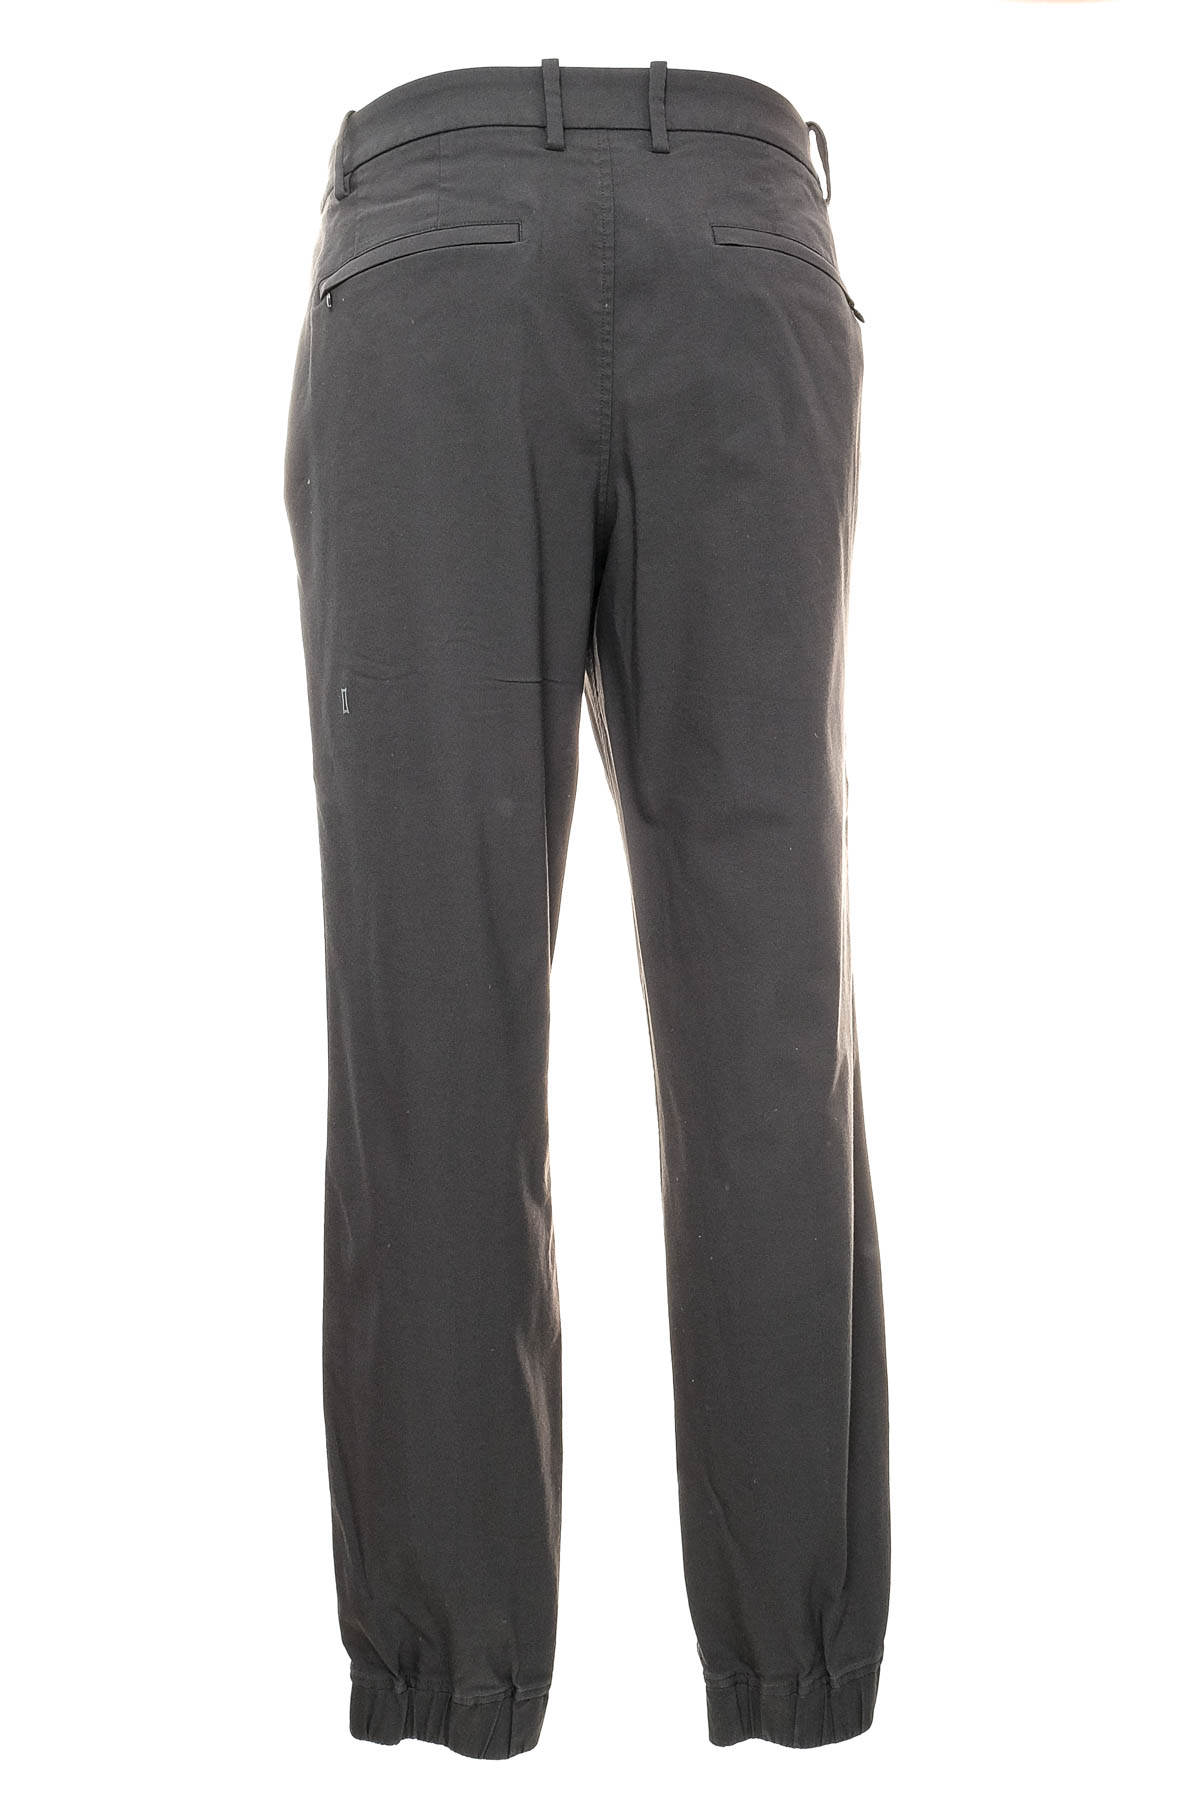 Men's trousers - KIT and ACE - 1